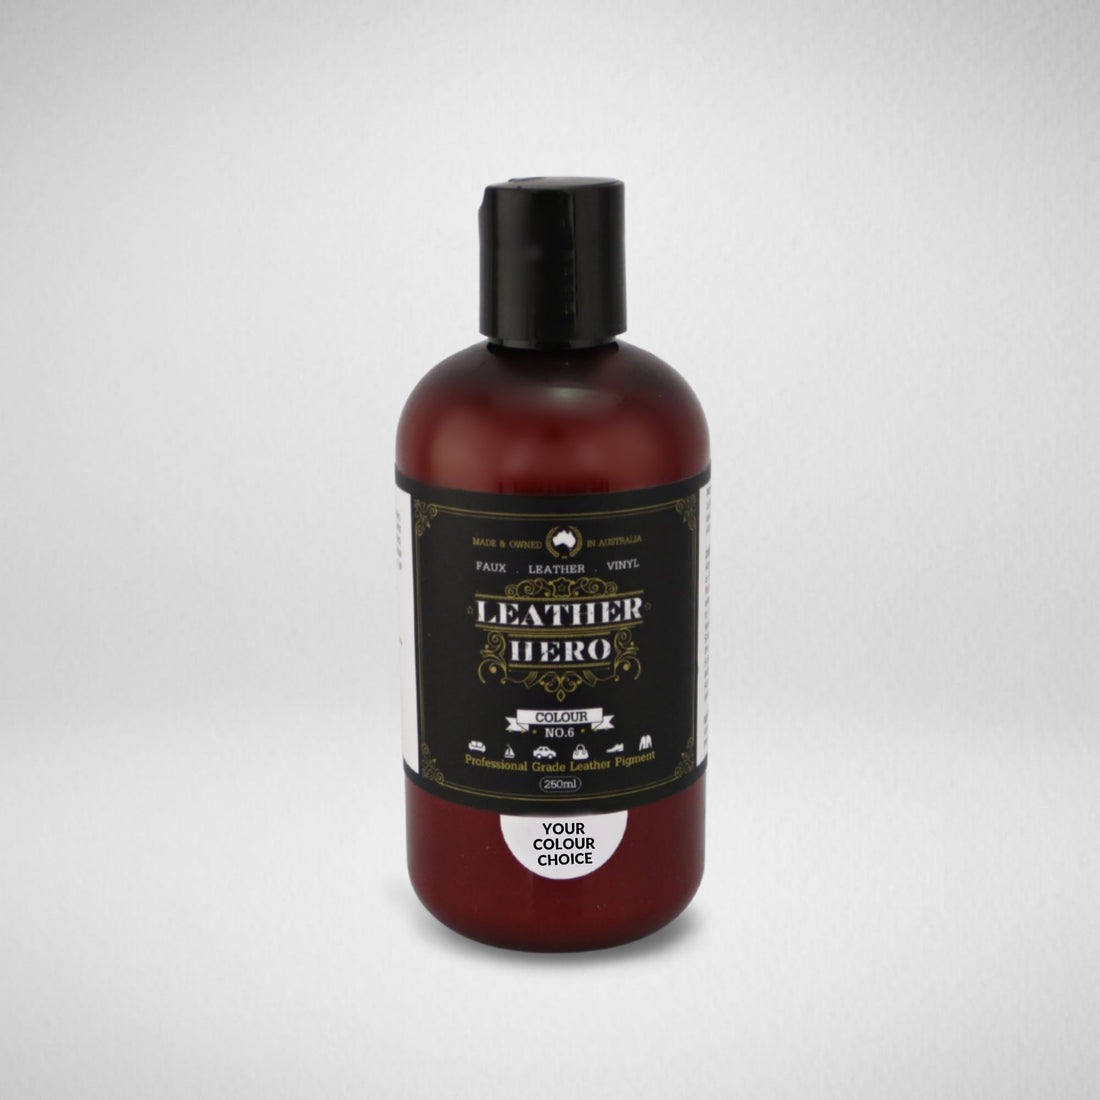 Leather Paint - Donkey Leather Repair & Recolouring Leather Hero Australia